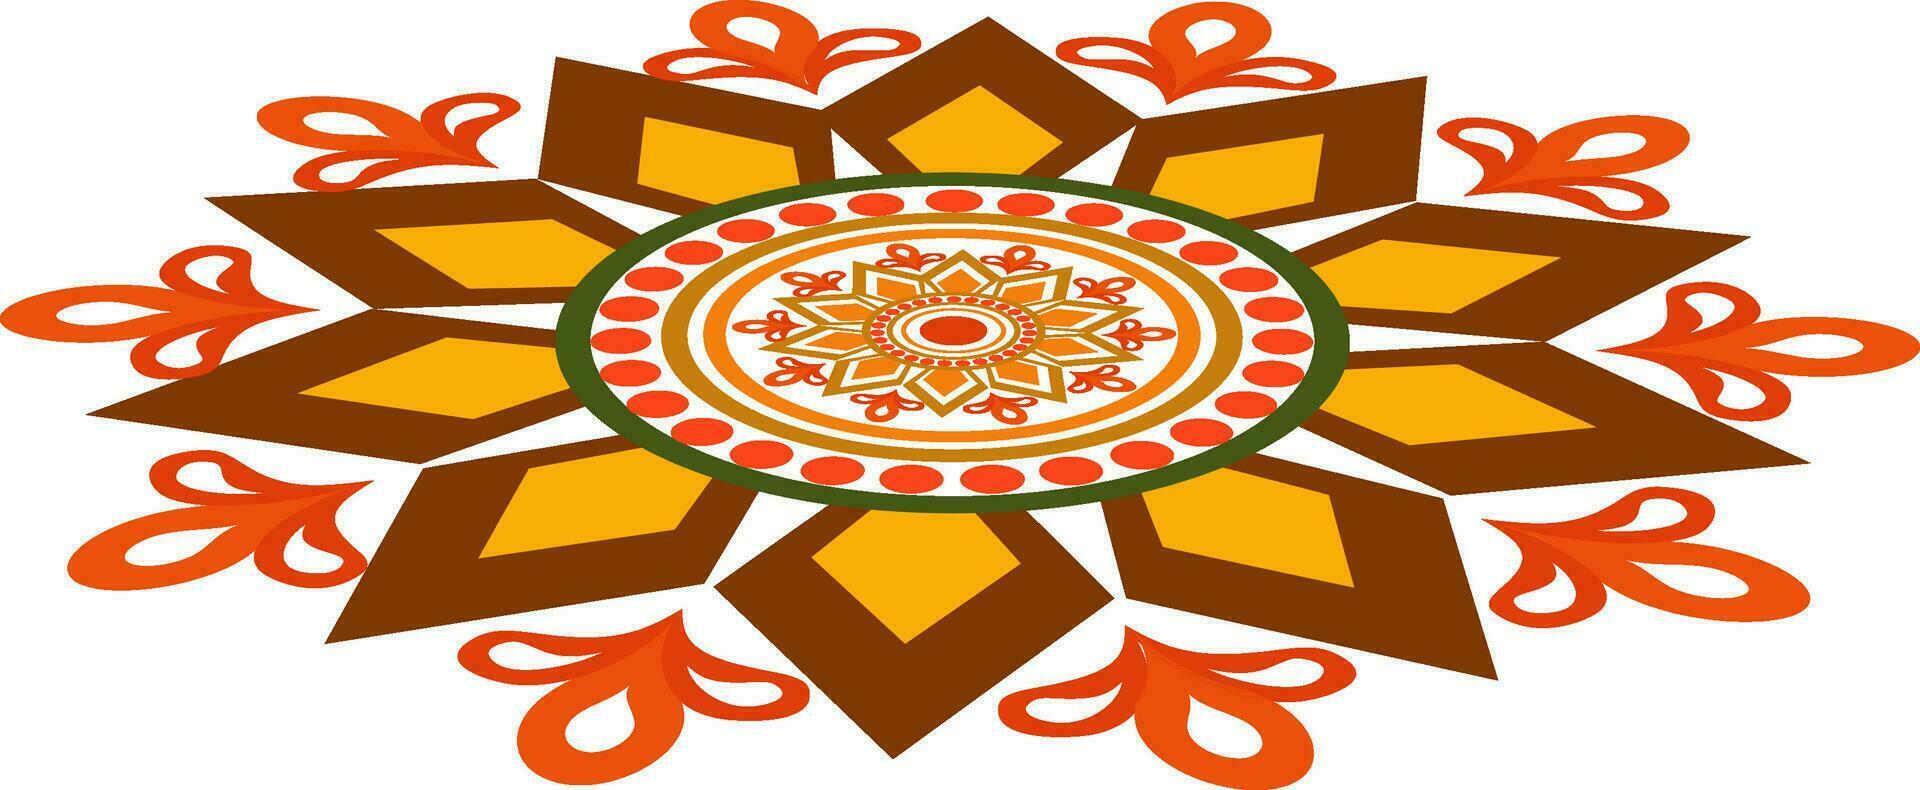 Colourful floral abstract design pattern or rangoli. vector